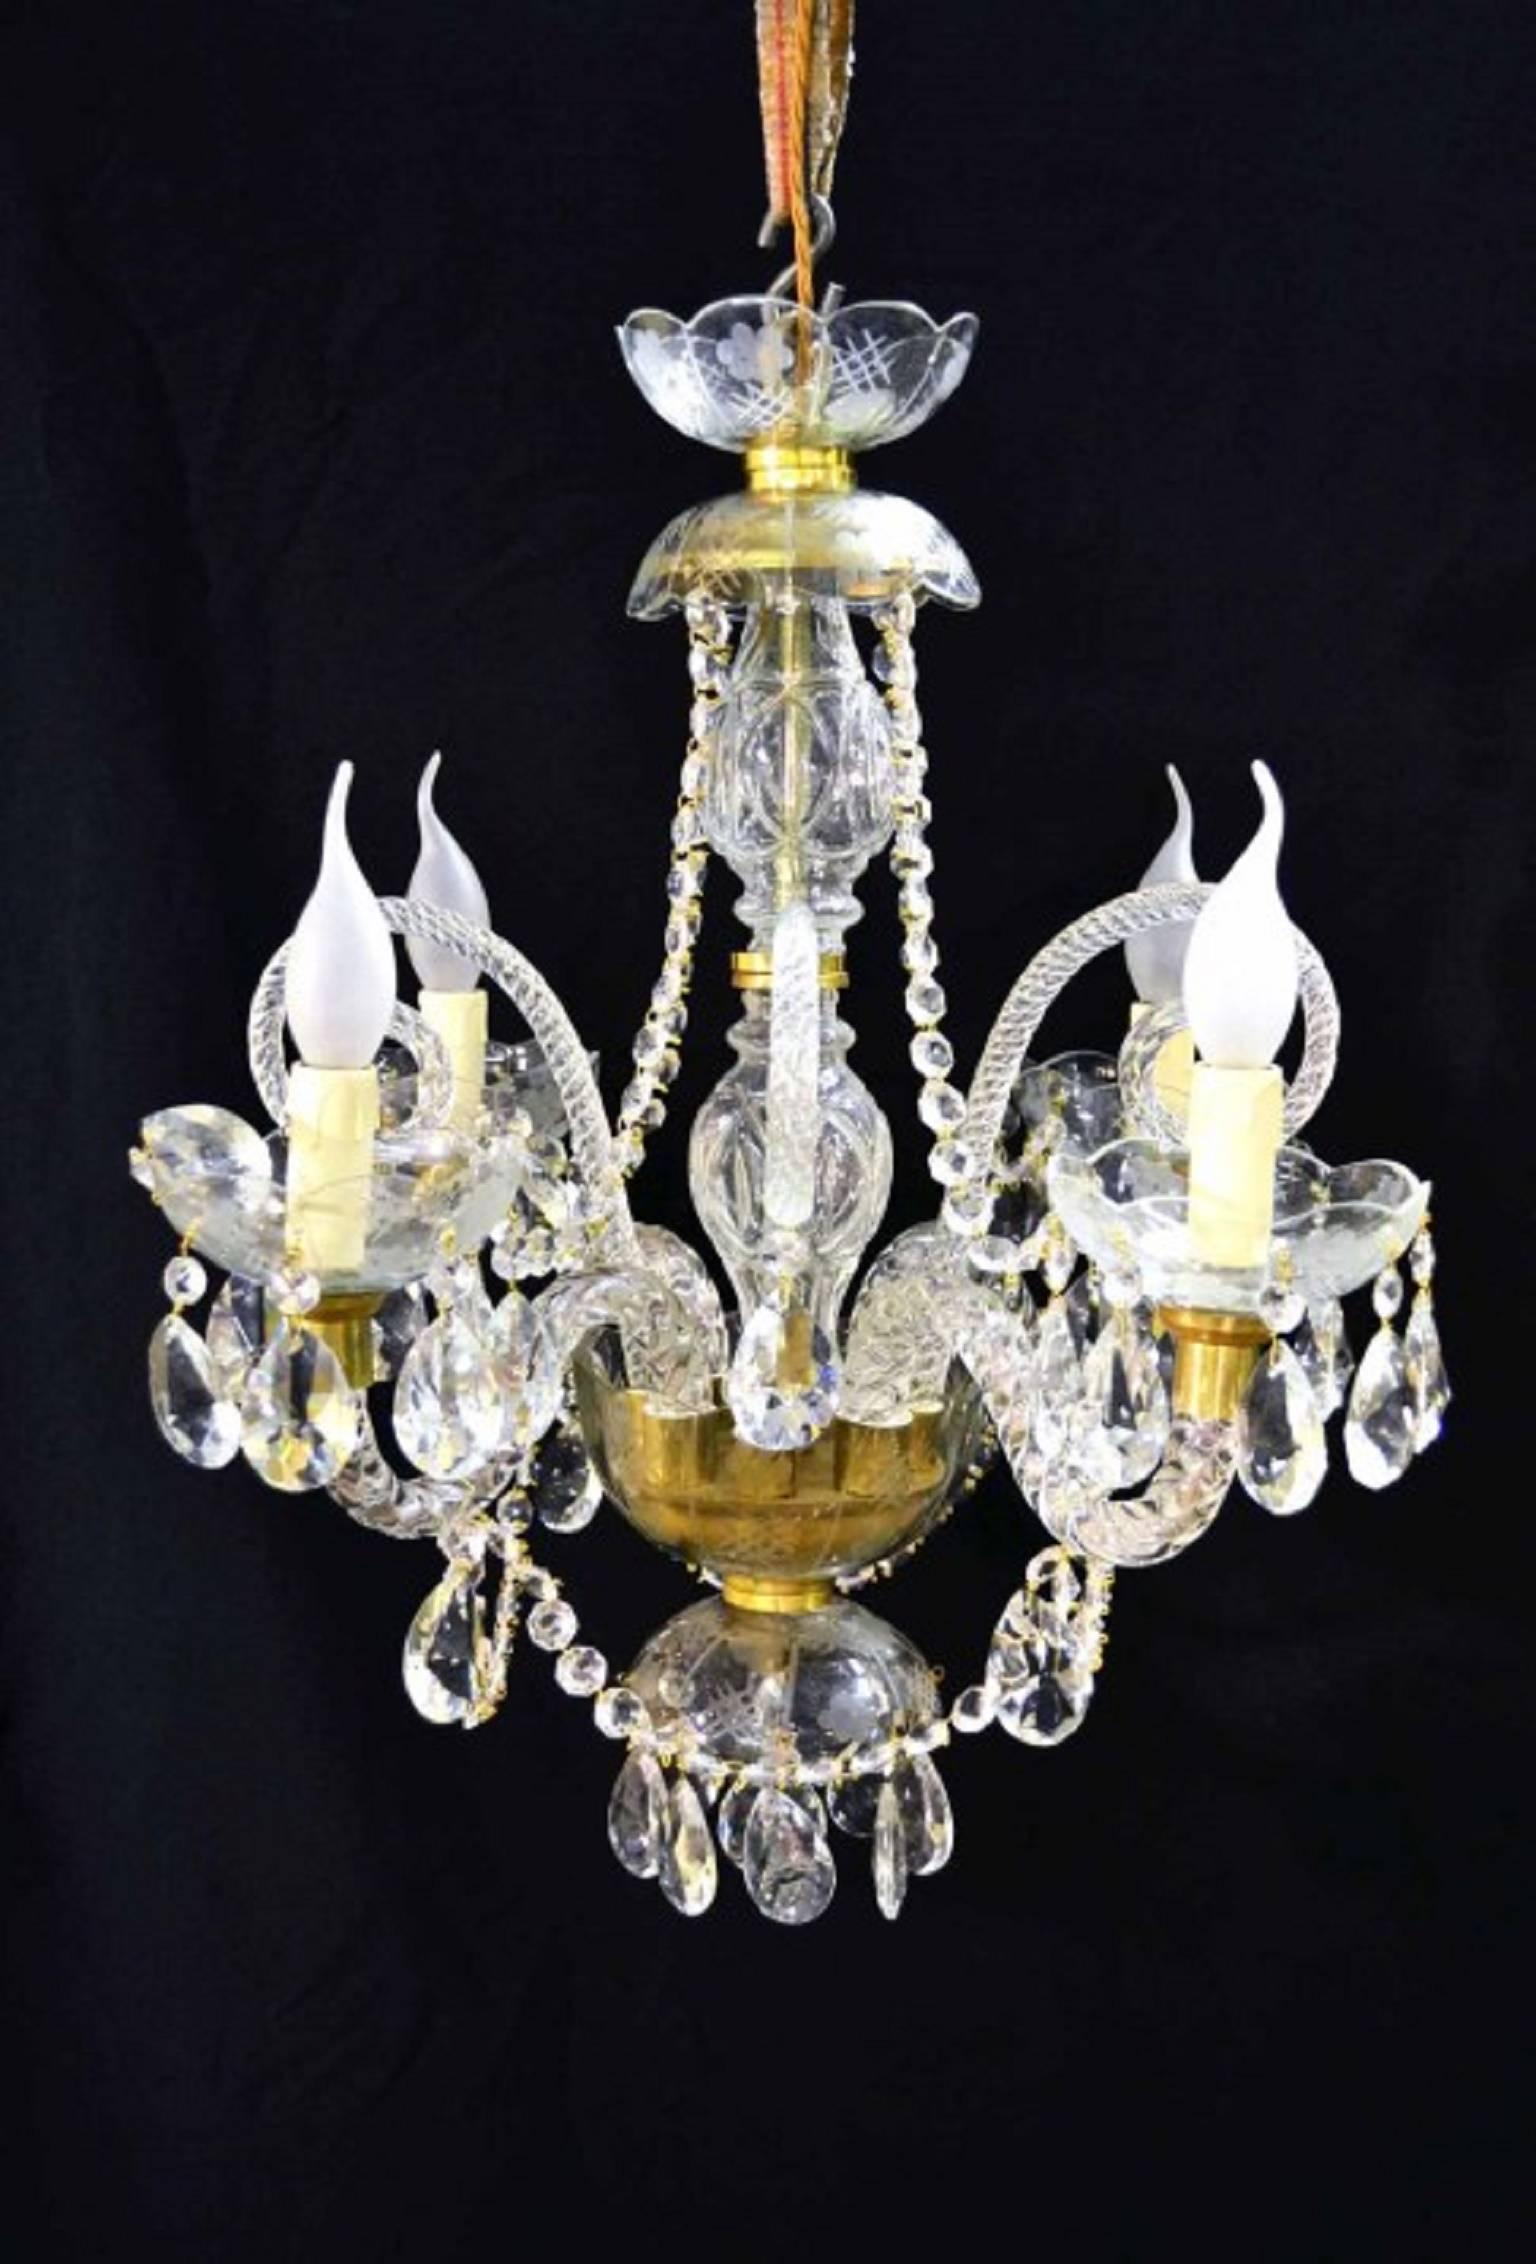 A beautiful pair of small vintage Venetian style crystal chandeliers with four lights each and beautiful clear crystal drops.

They are in fantastic condition they have been dismantled, cleaned and rewired.
Add a touch of class to your home with